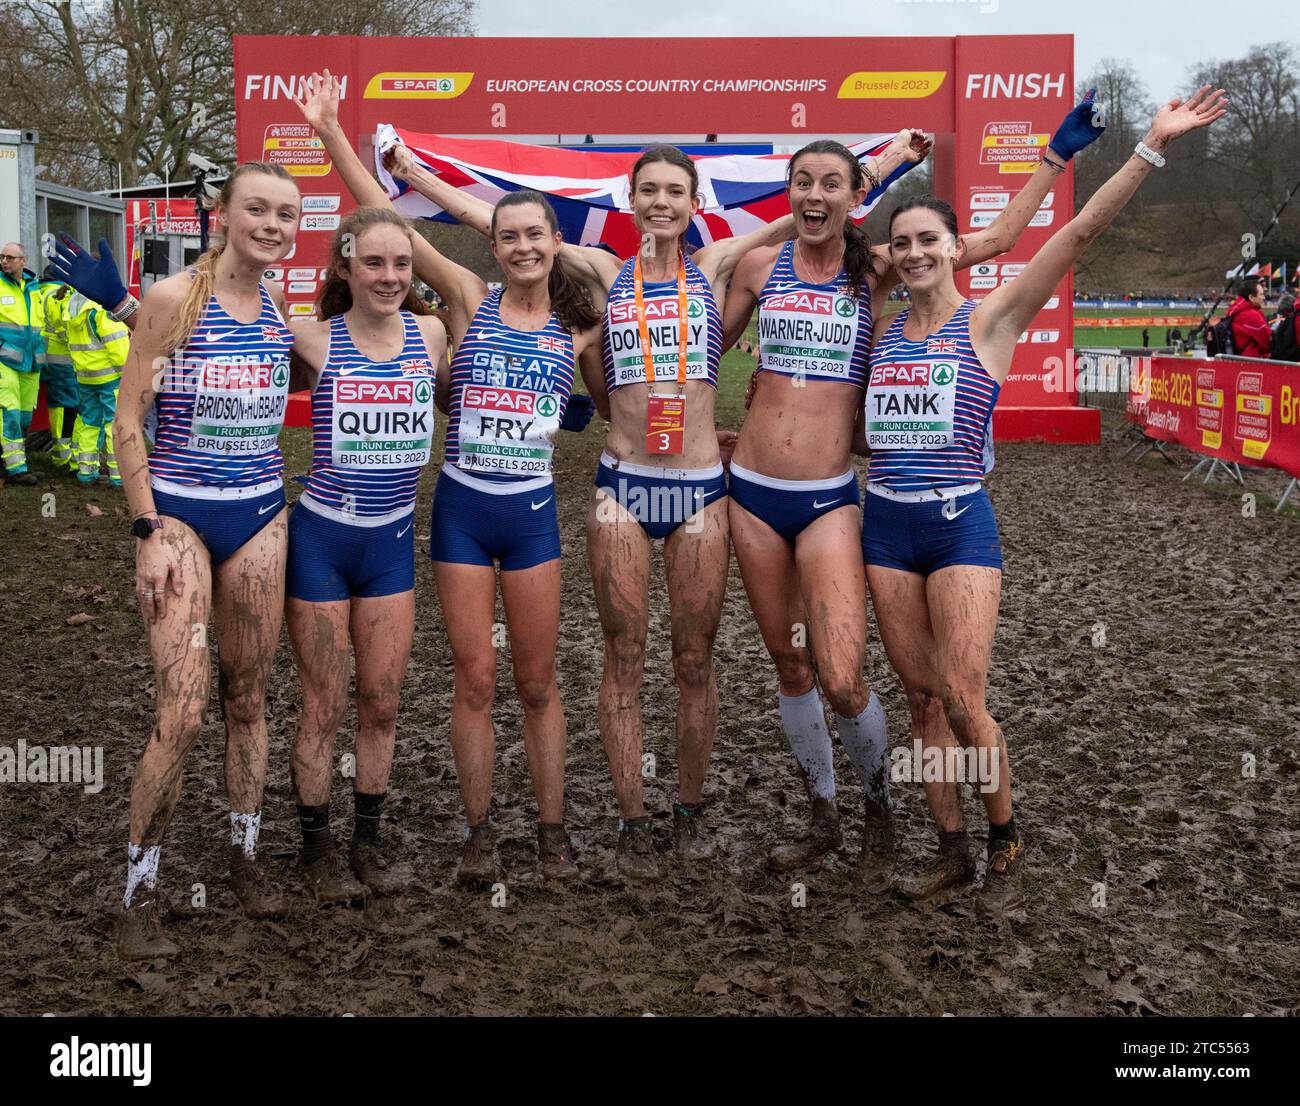 Brussels, Belgium. 10th Dec, 2023. Niamh Bridson-Hubbard, Amelia Quirk, Izzy Fry, Abbie Donnelly, Jessica Warner-Judd and Poppy Tankin of Great Britain & NI  celebrate after wining team gold in the women’s senior race at the SPAR European Cross Country Championships, Laeken Park in Brussels, Belgium on 10th December 2023. Photo by Gary Mitchell Credit: Gary Mitchell, GMP Media/Alamy Live News Stock Photo